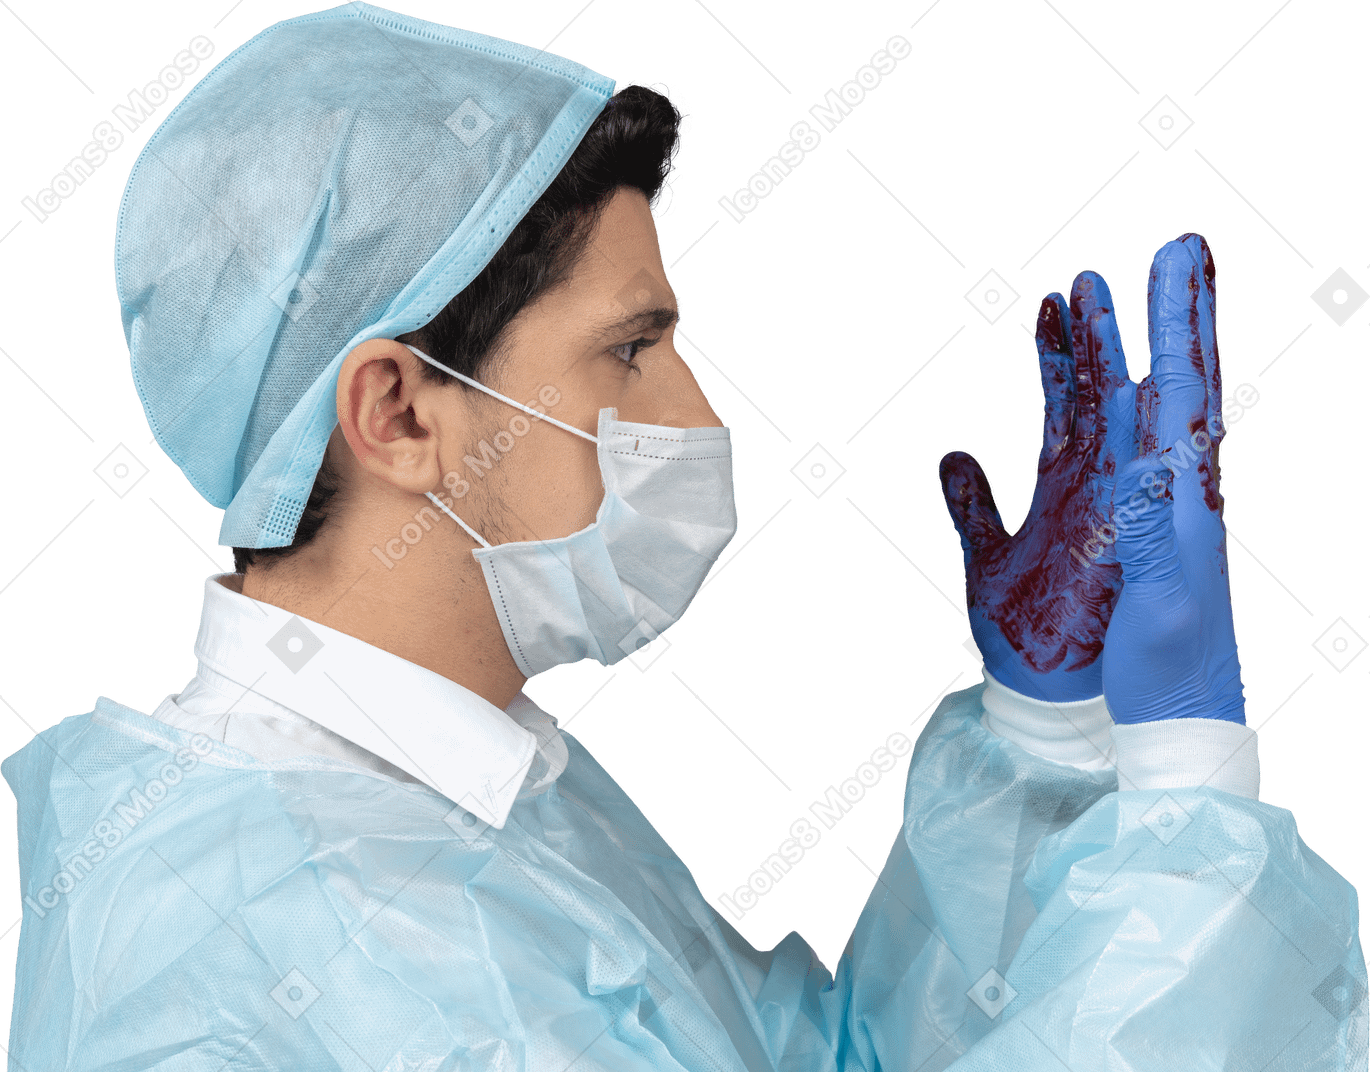 Doctor looking at his hands covered in blood in profile